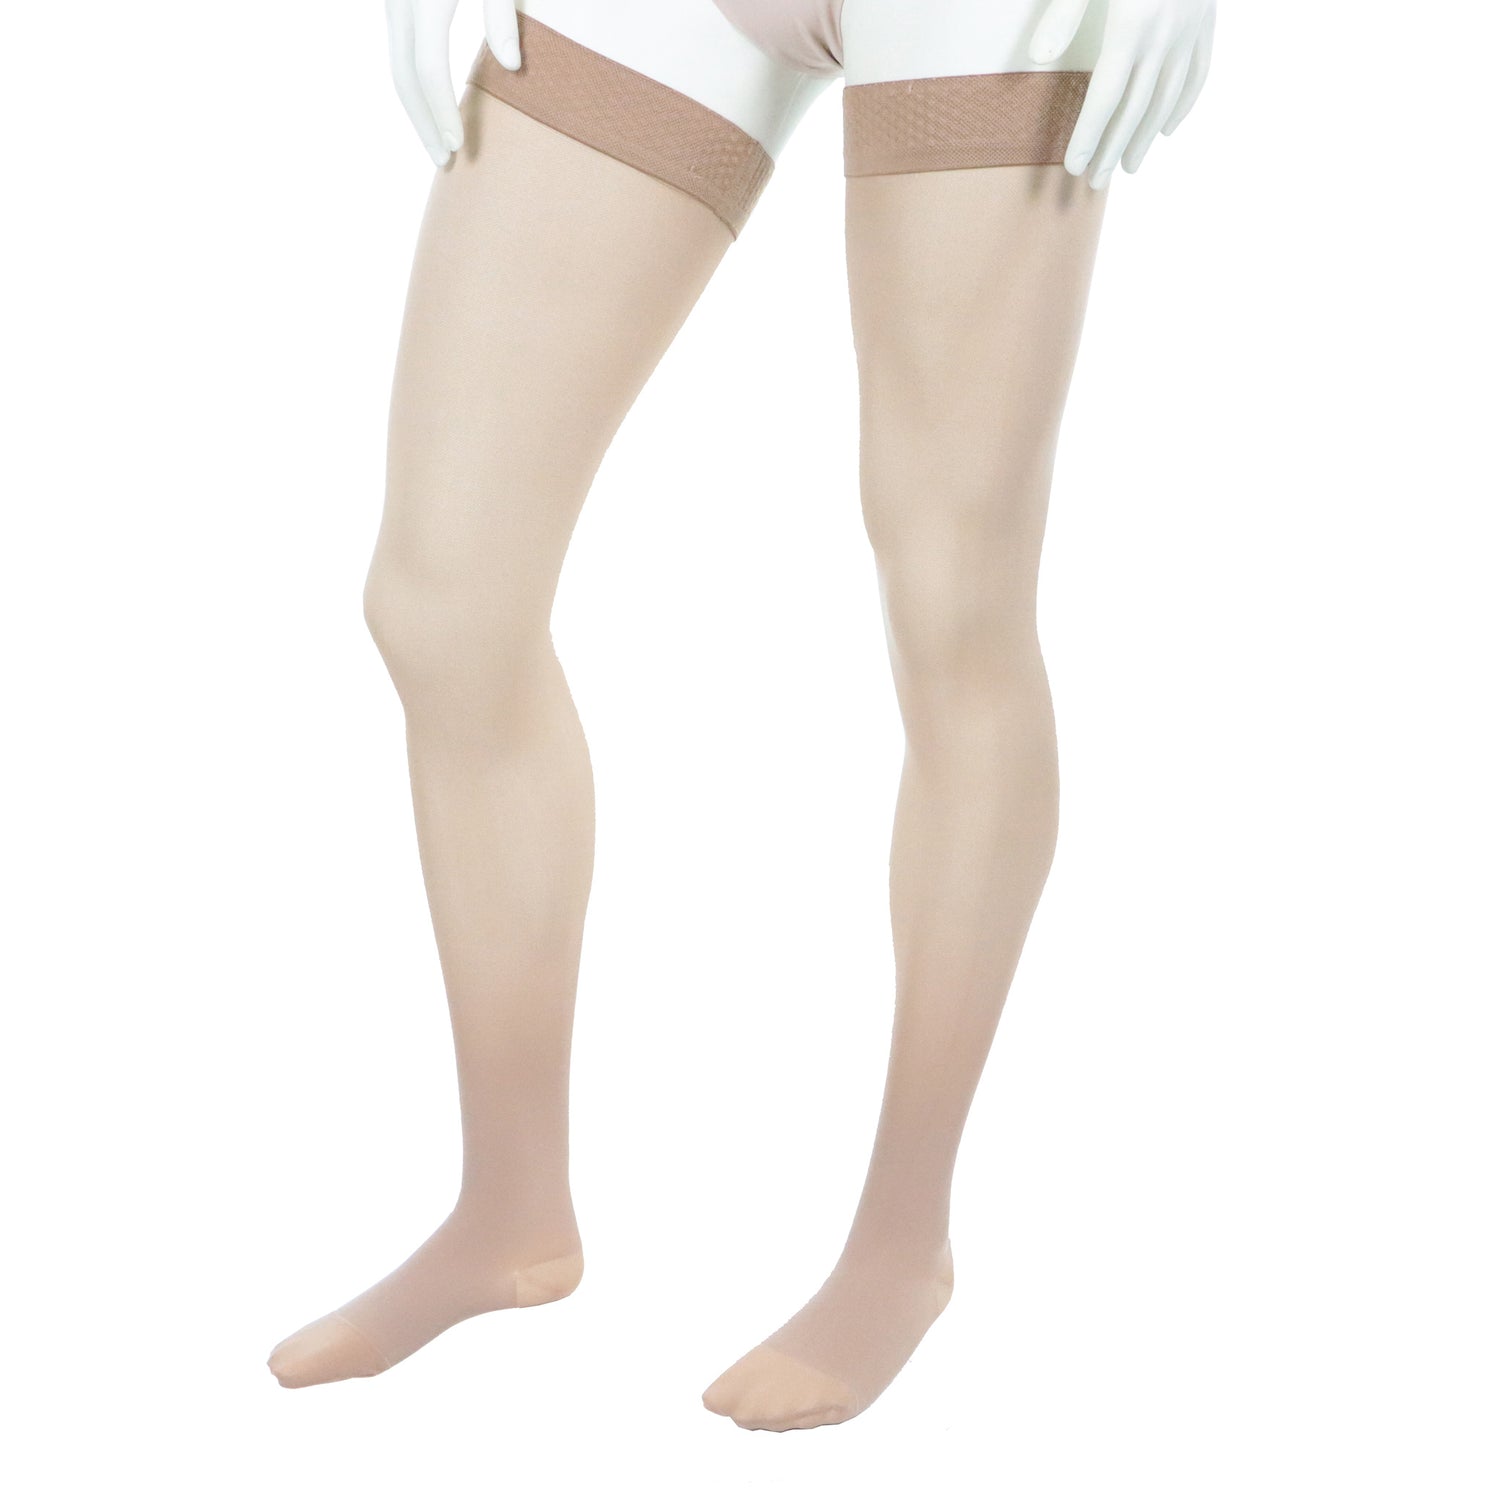 Doctor Brace thigh high 20-30 mmhg compression stockings nude color left view